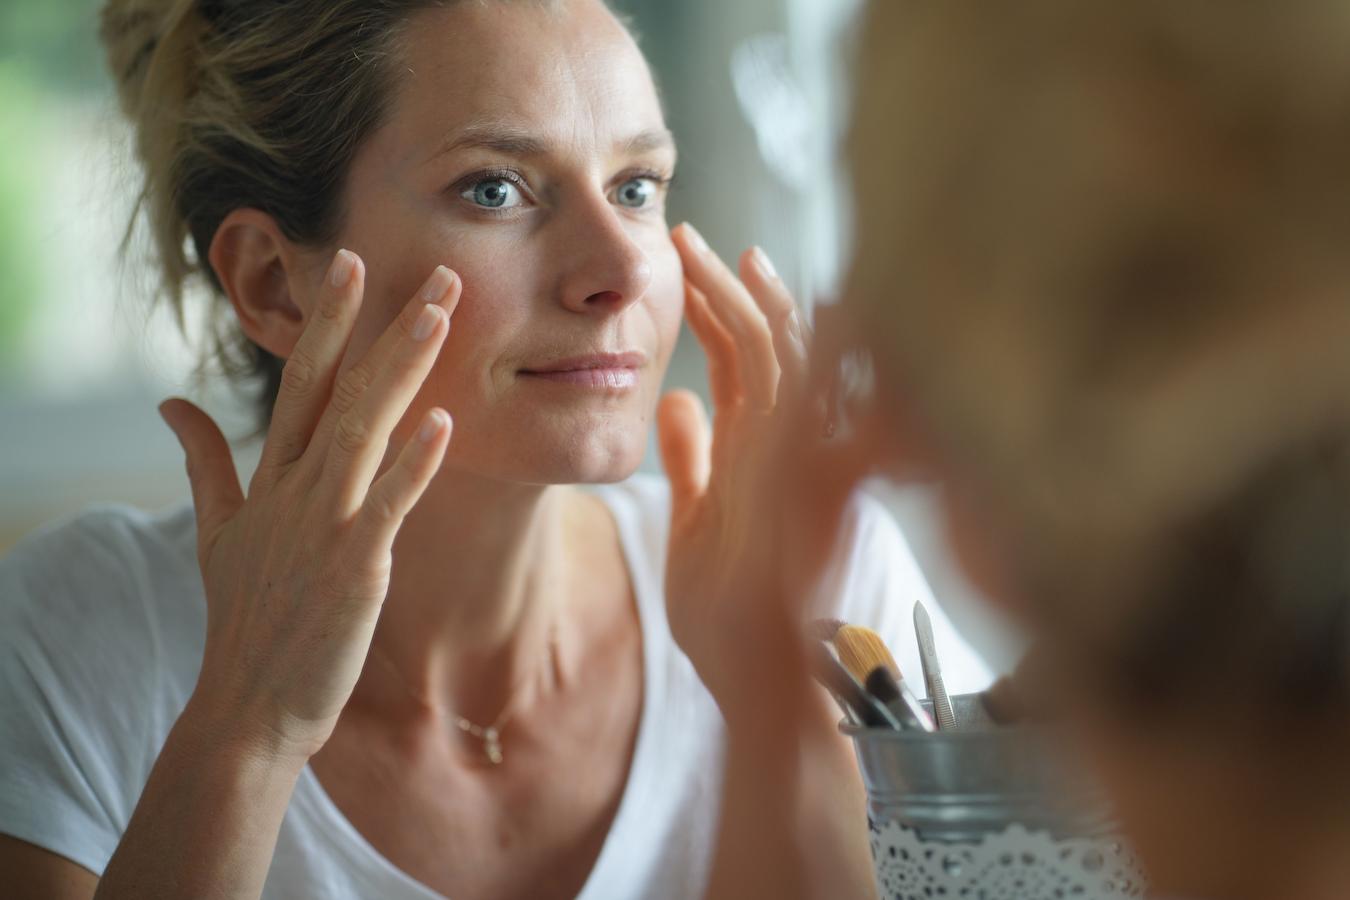 woman looking at her face in the mirror chemical peel pores says dr clay mask laser treatments